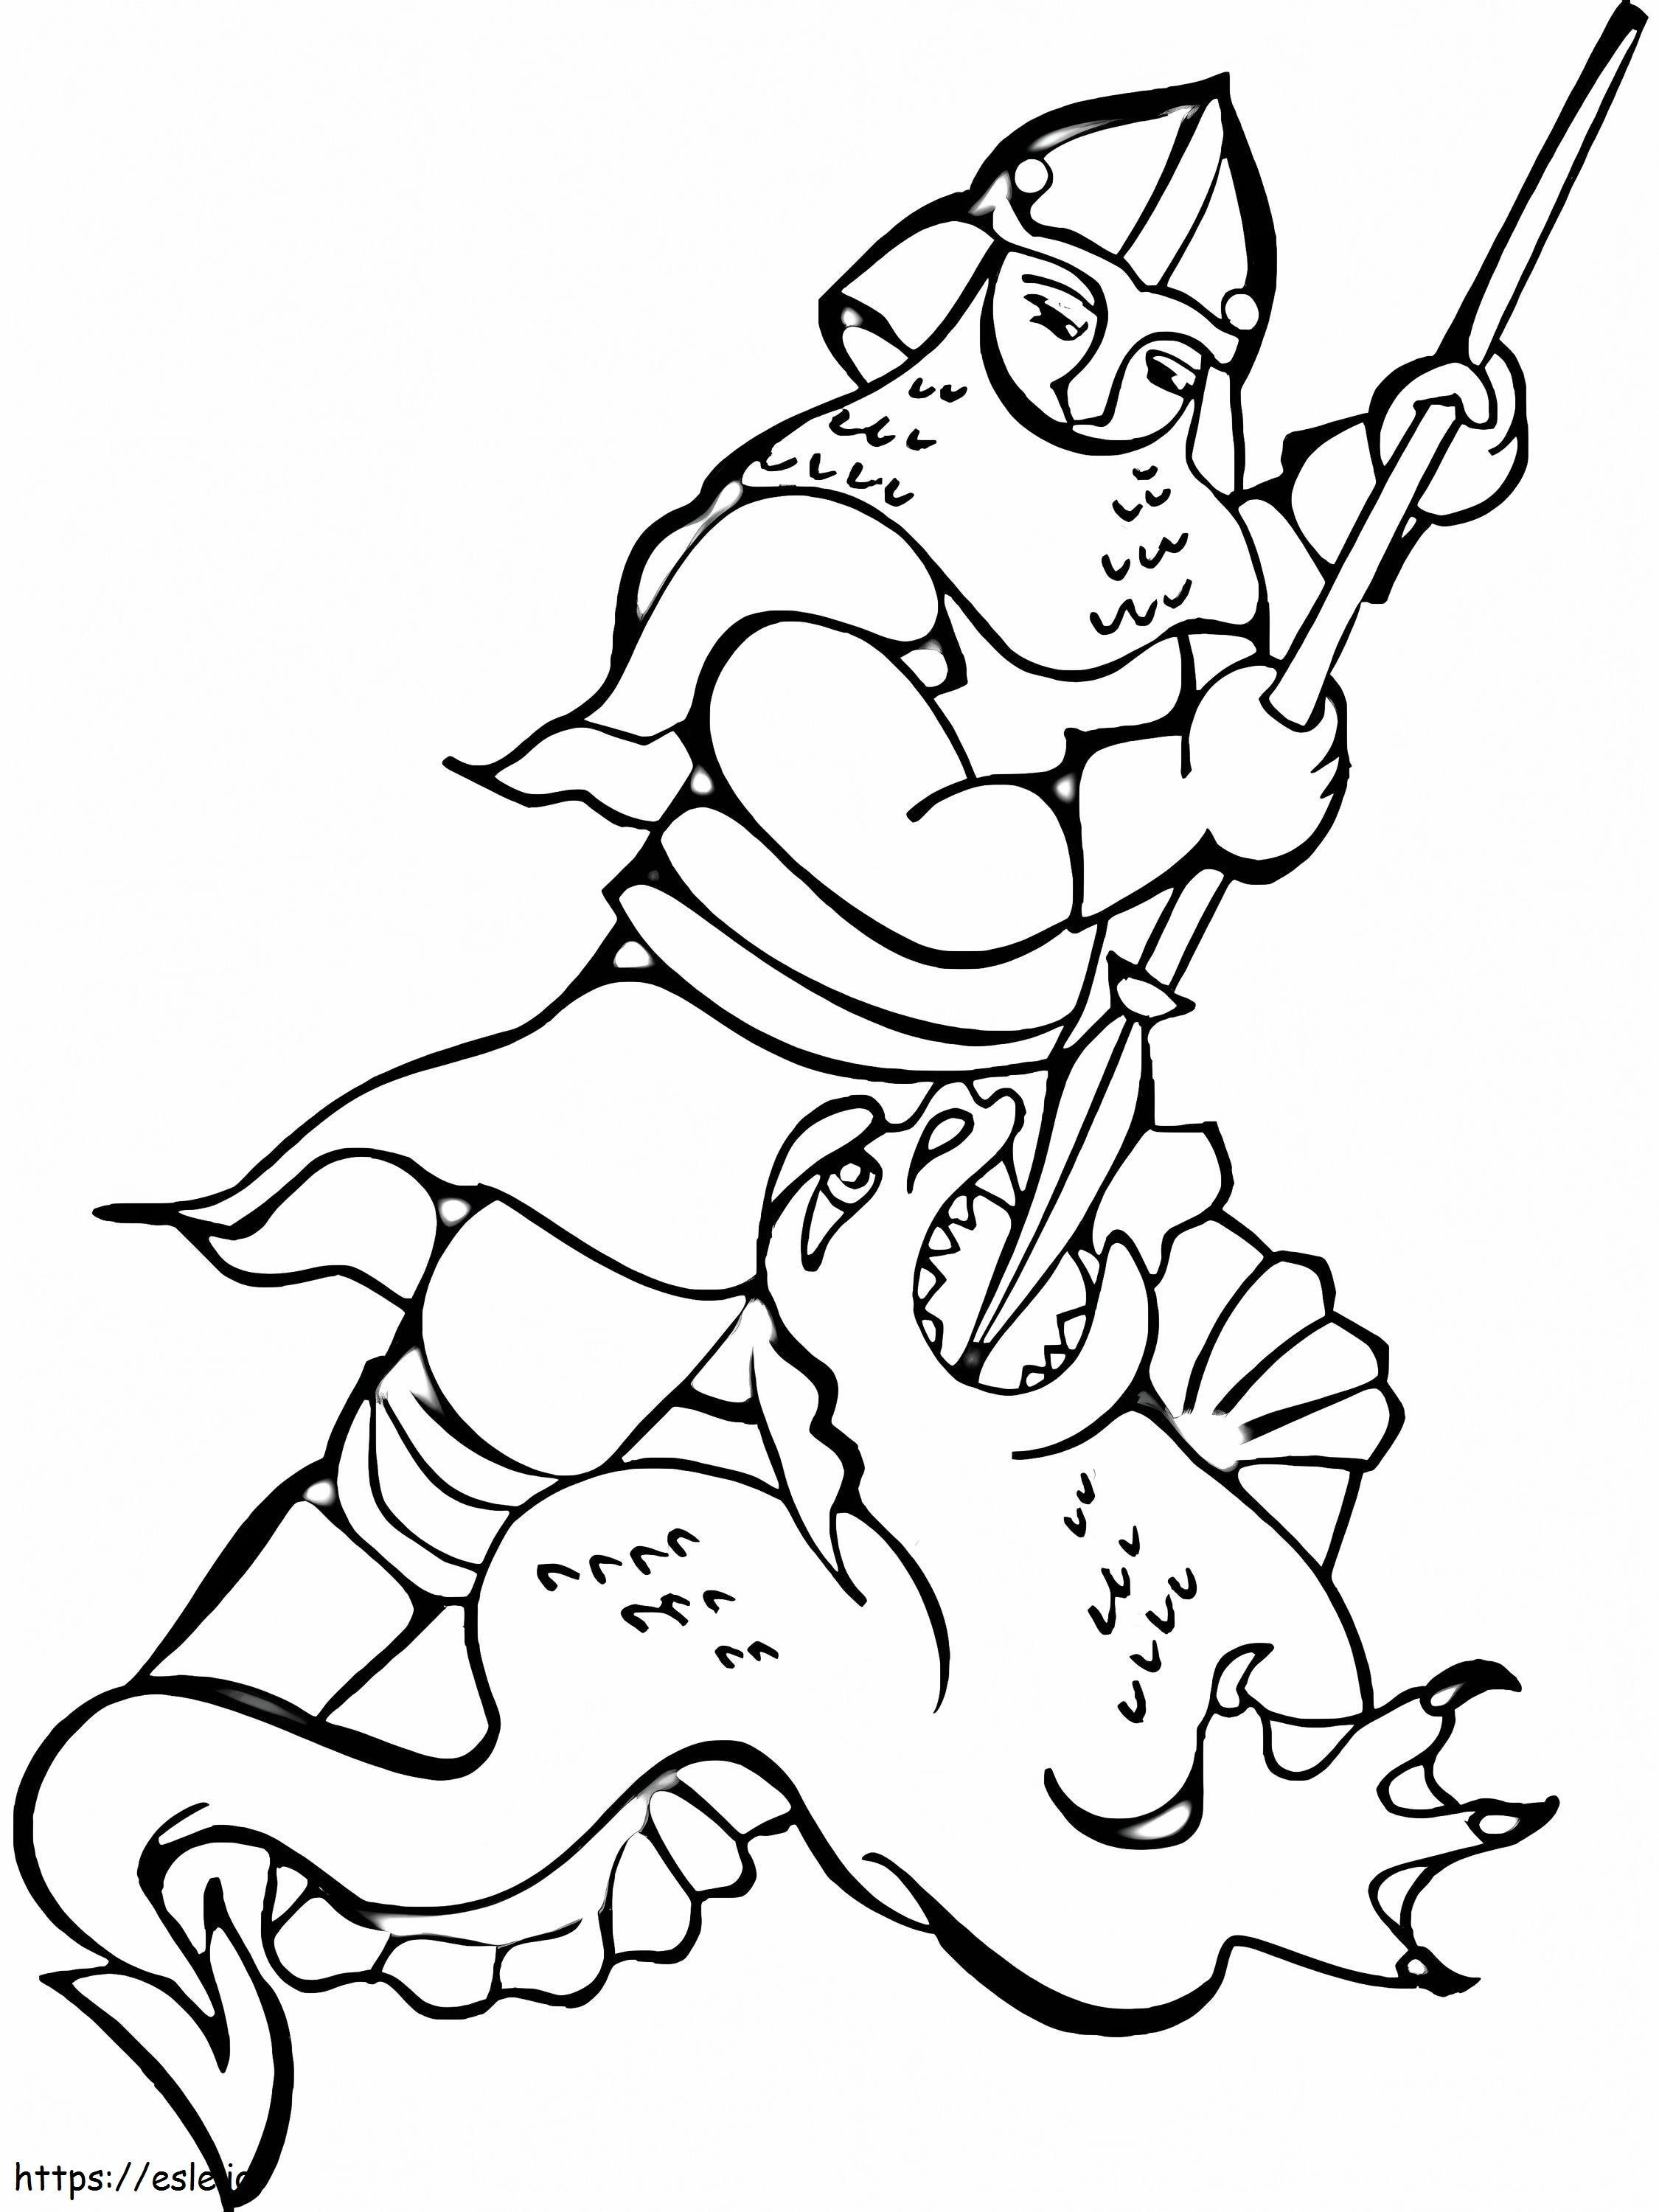 Knight Fighting The Dragon coloring page